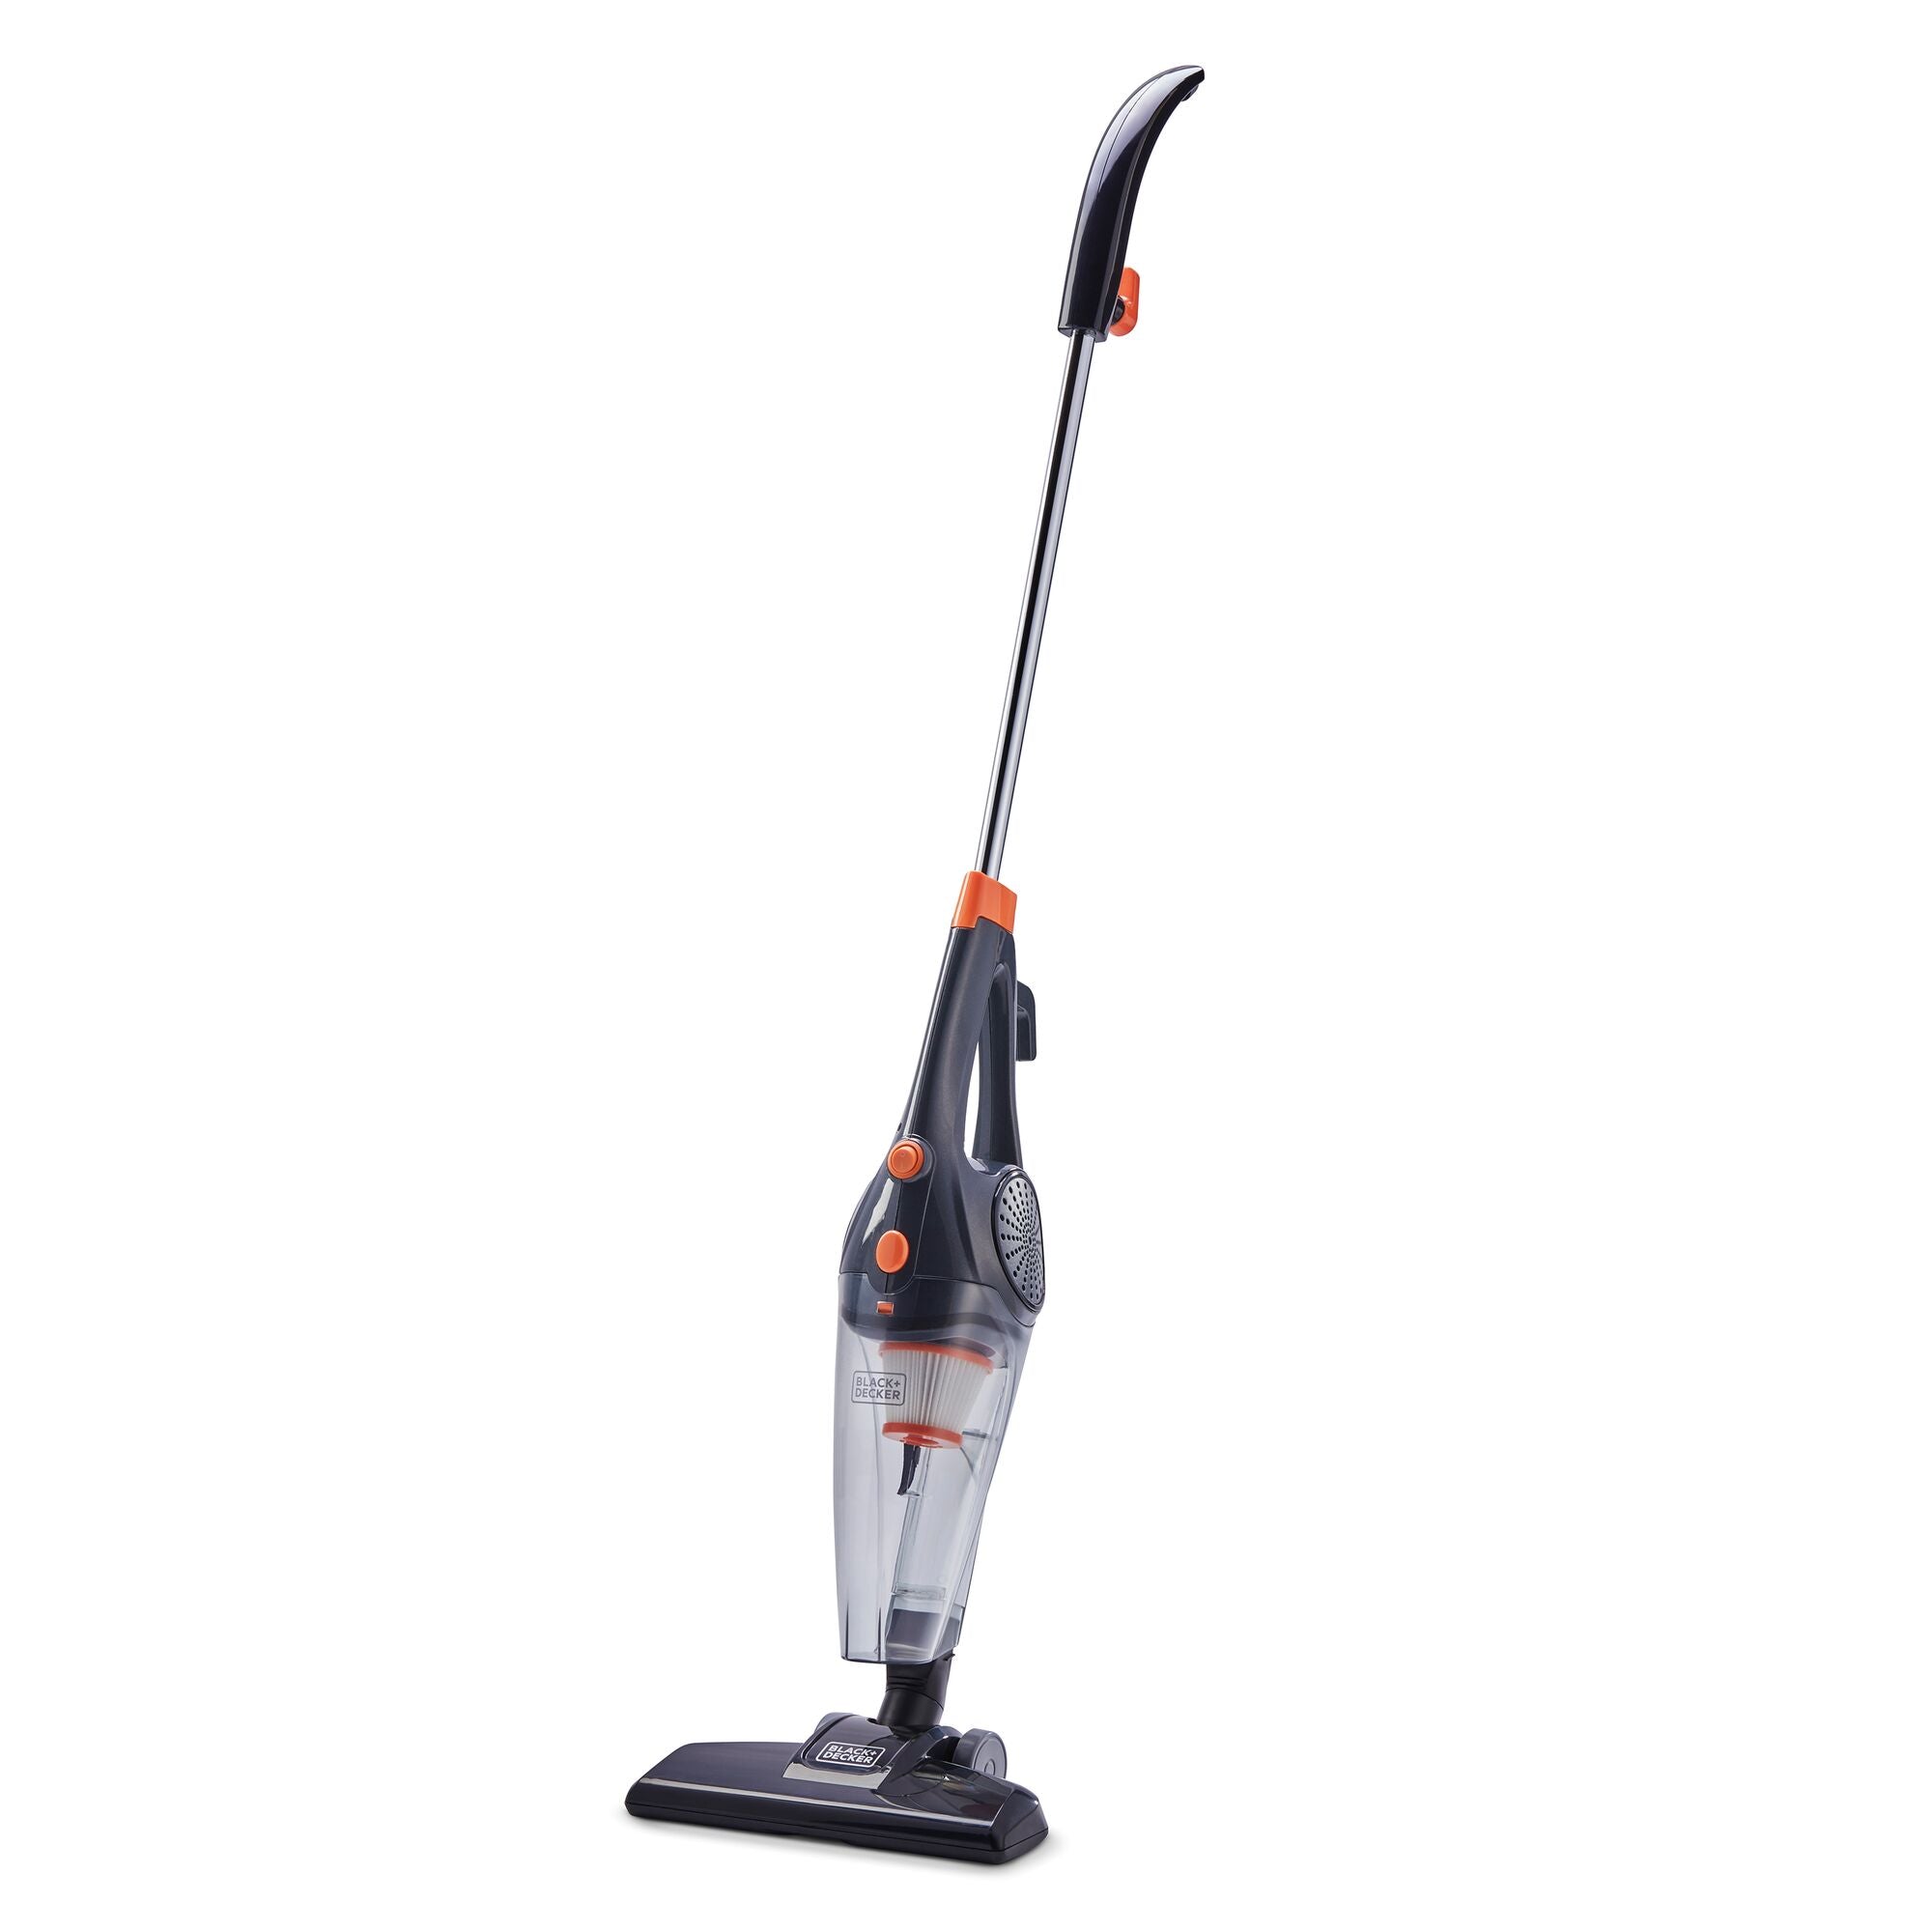 Mom Knows Best: The Black And Decker 3 in 1 Stick Vacuum Is Awesome